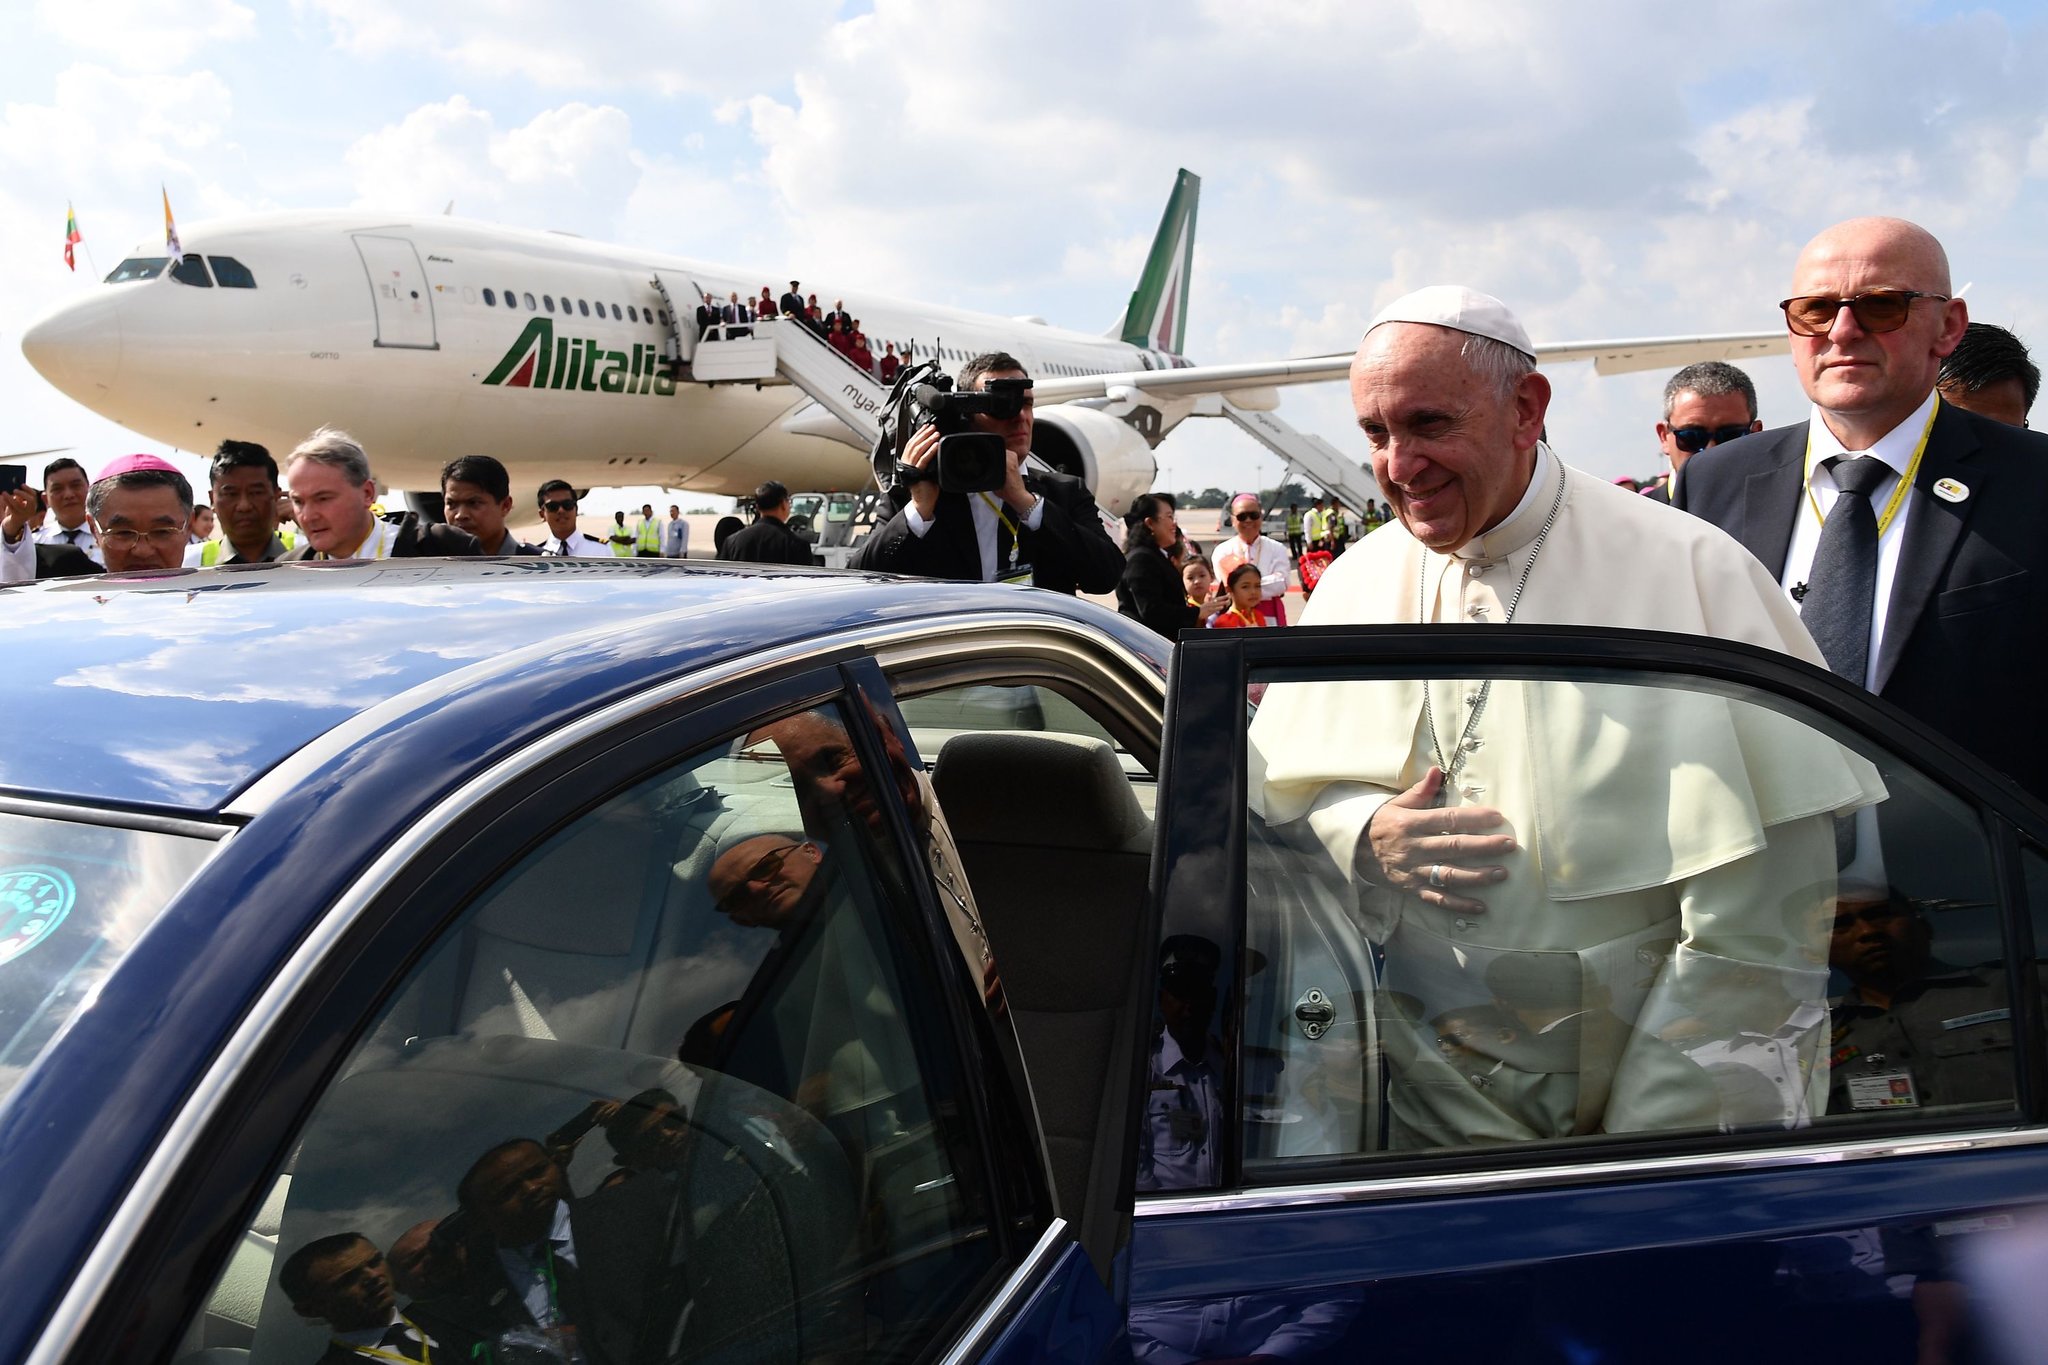 Pope Francis Arrives in a Myanmar Tarnished by Rohingya Crackdown